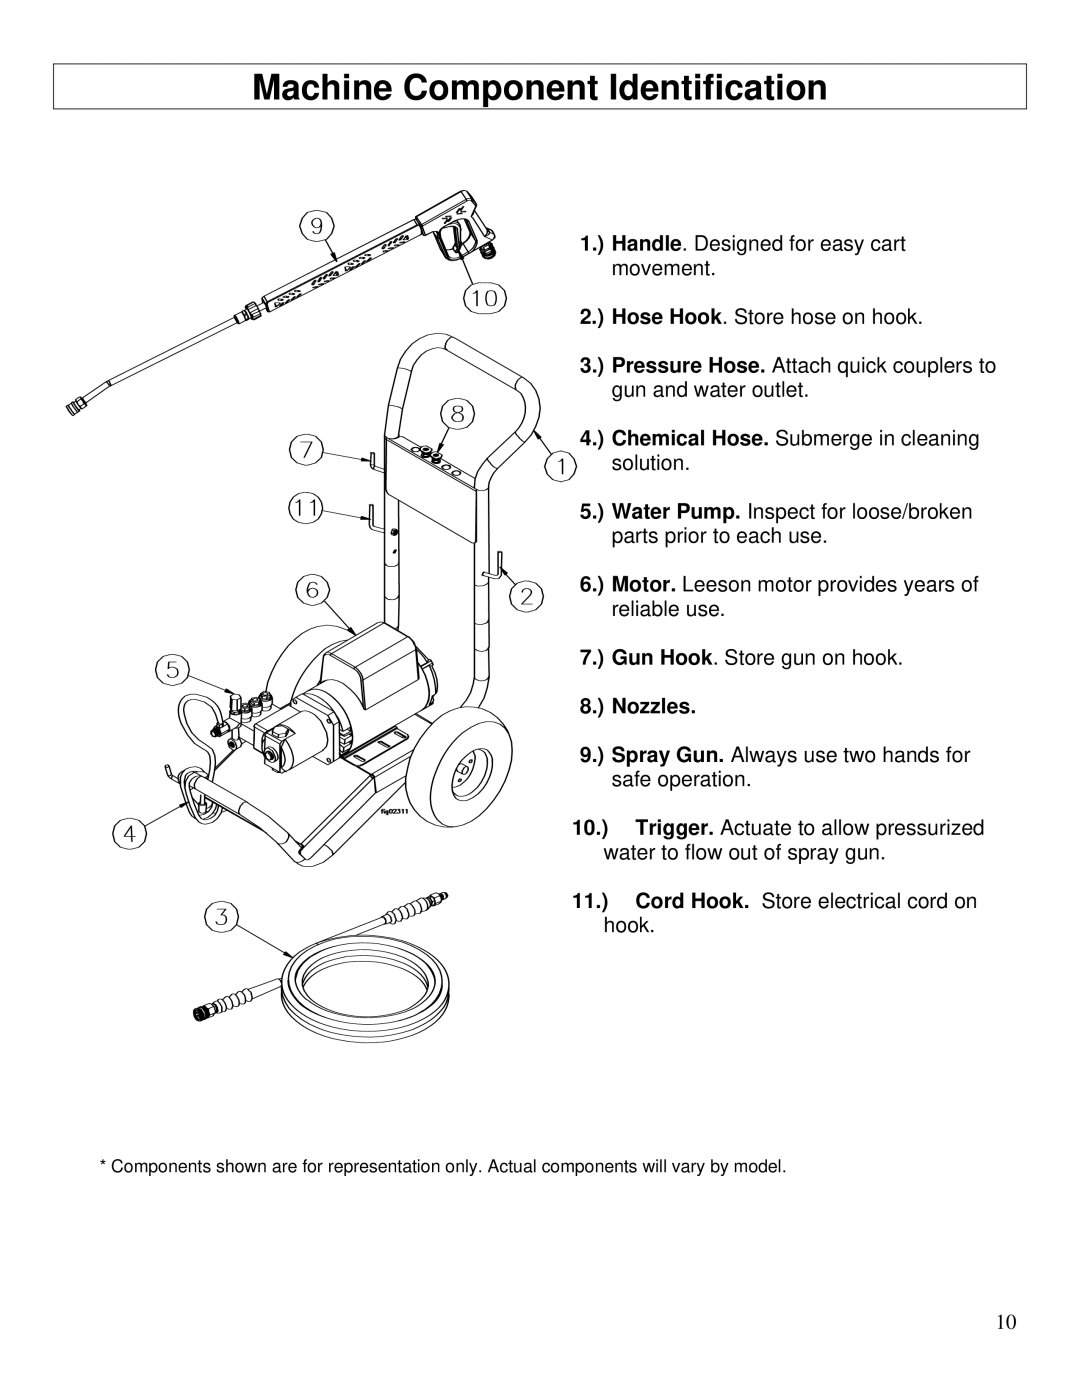 North Star M1573001A owner manual Machine Component Identification, Nozzles 